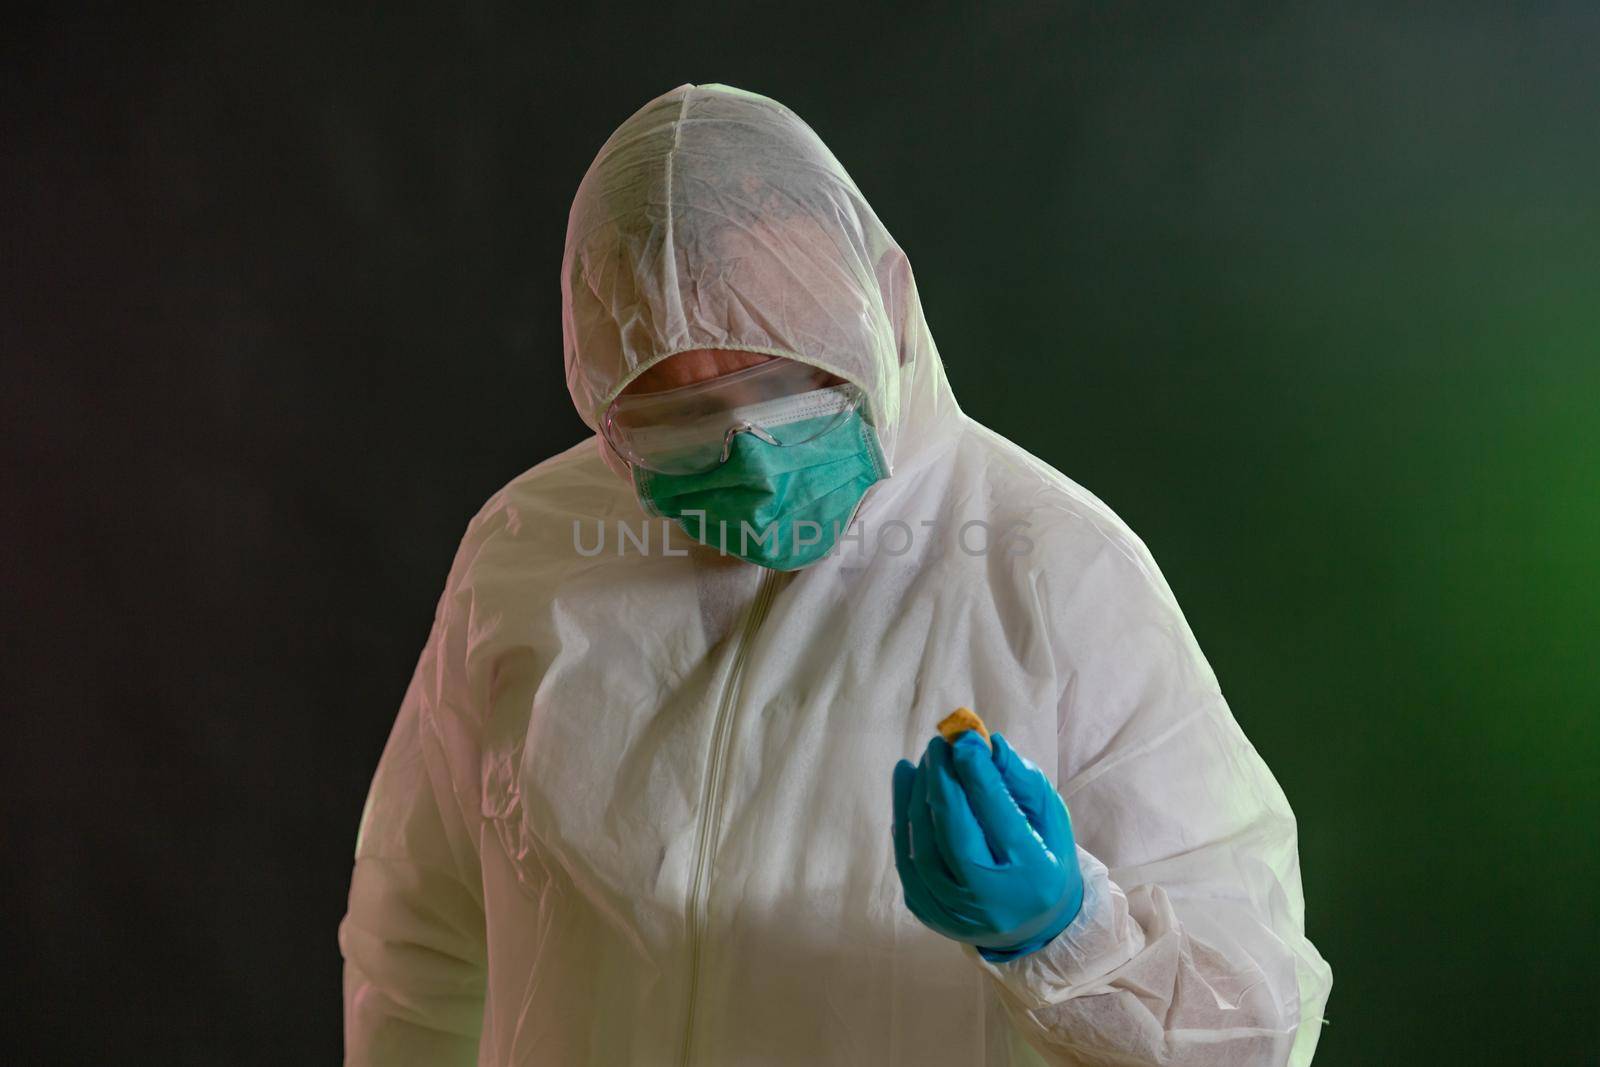 Man in chemical suit inspecting possible toxic materials by imagesbykenny